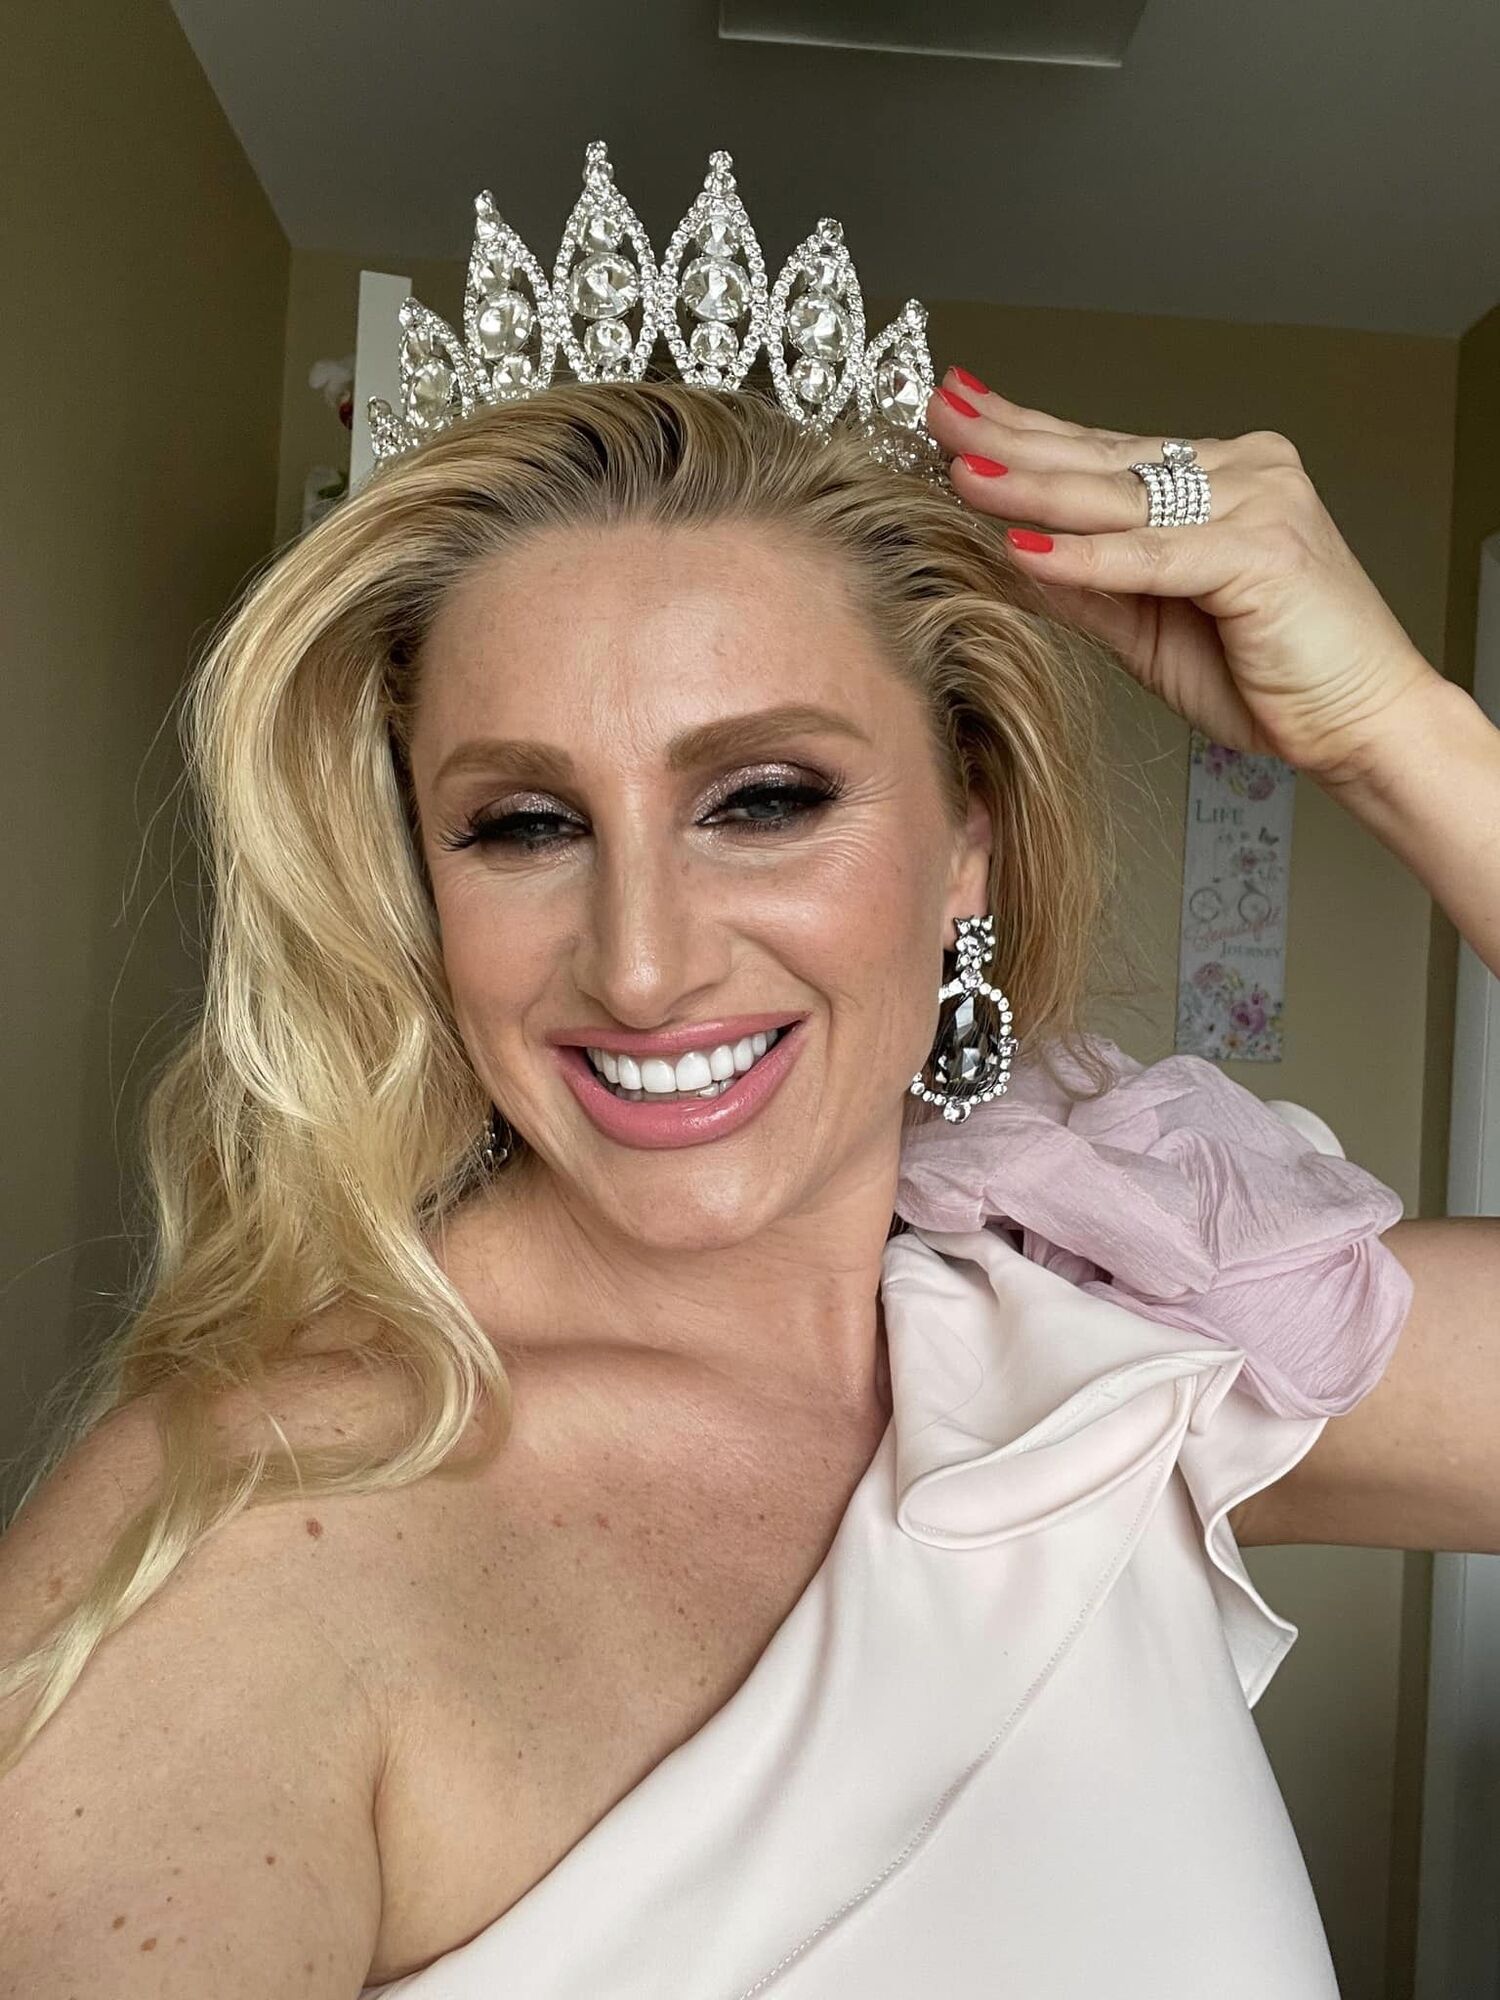 Ukrainian gymnastics star wins beauty contest in the US at 47: what the Olympic champion looks like